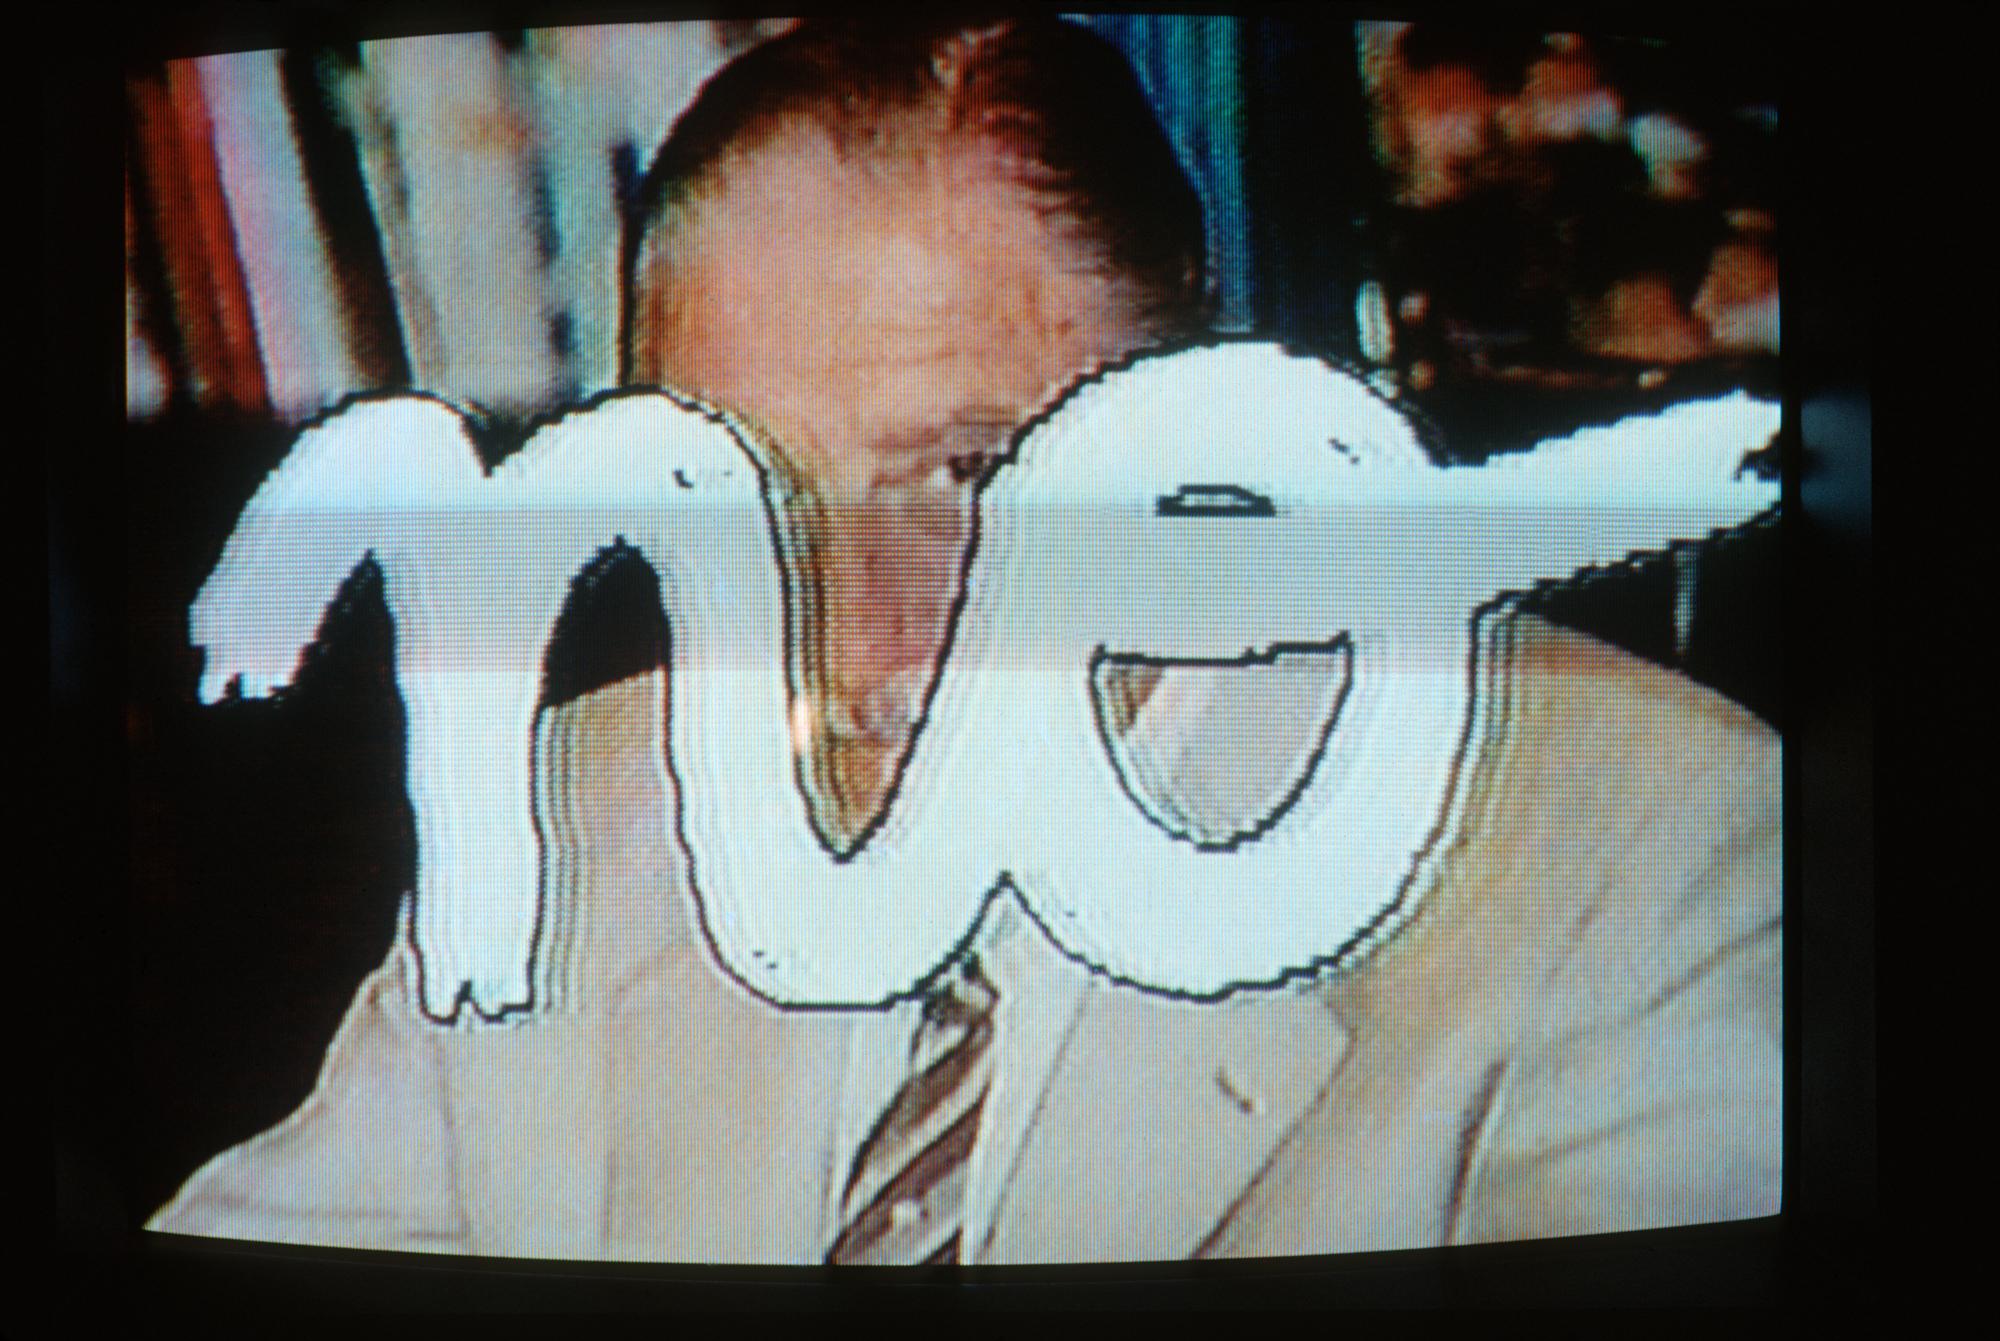 Chile - The "NO" campaign on TV, 1988